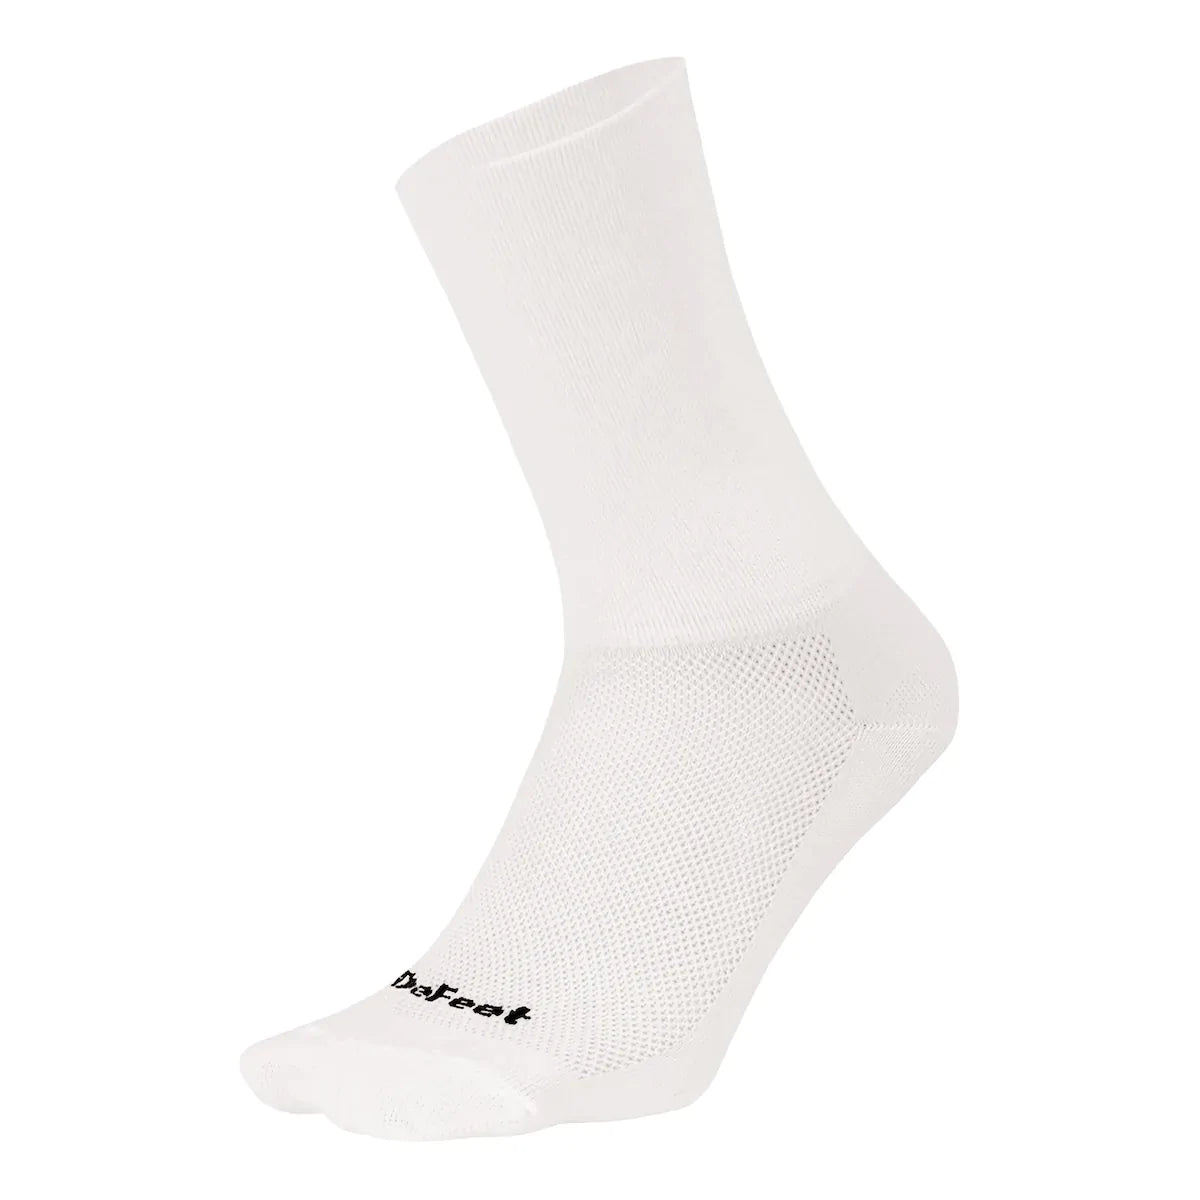 DeFeet Aireator 6" D-Logo cycling sock with 6" double cuff in white